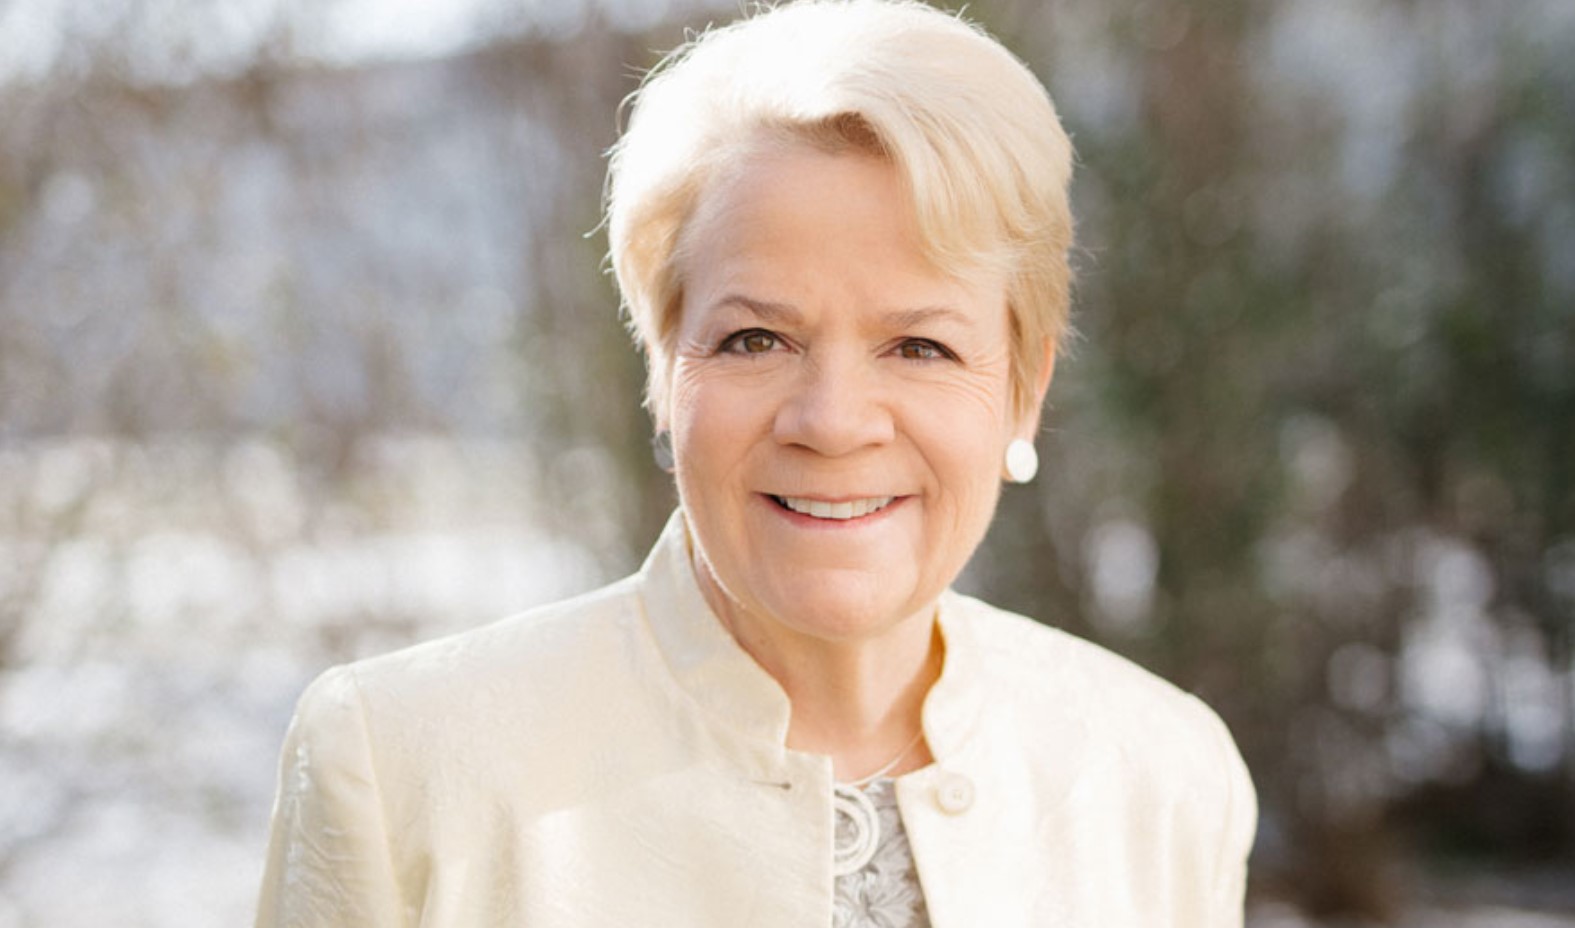 Master Class with Chicago Symphony Orchestra Chief Conductor Marin Alsop